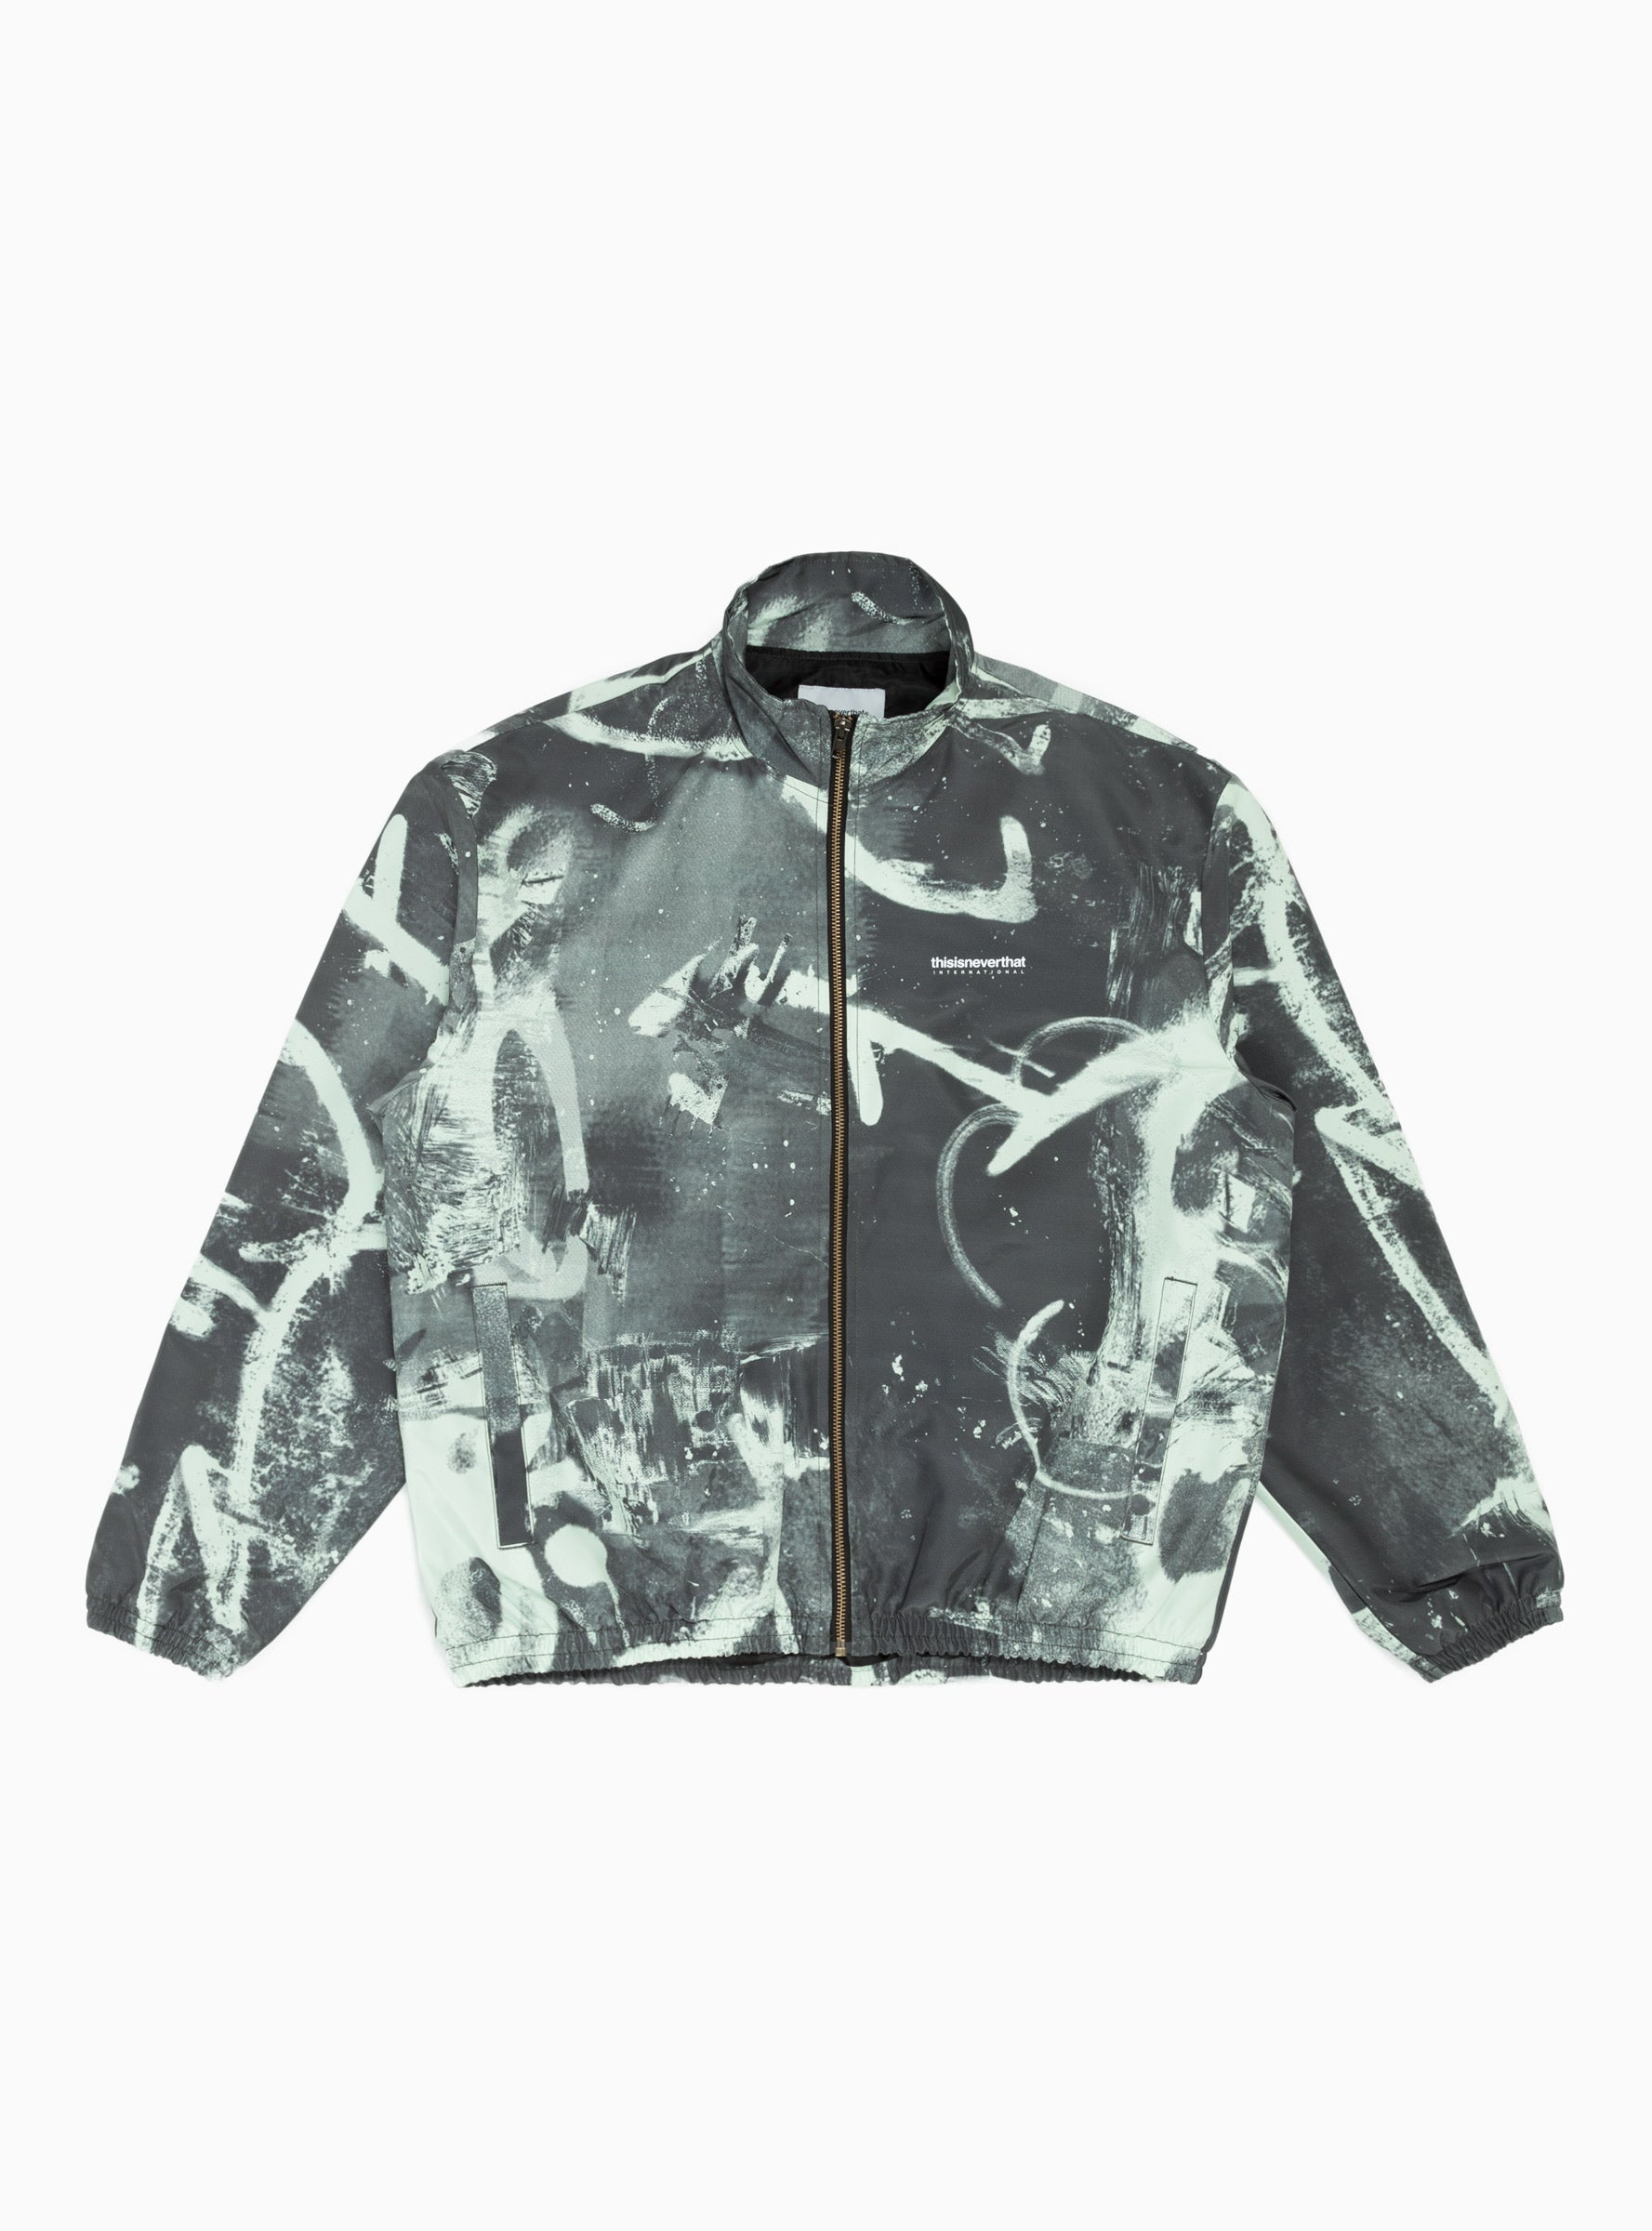 INTL. Team Jacket Black & Grey Wall by thisisneverthat